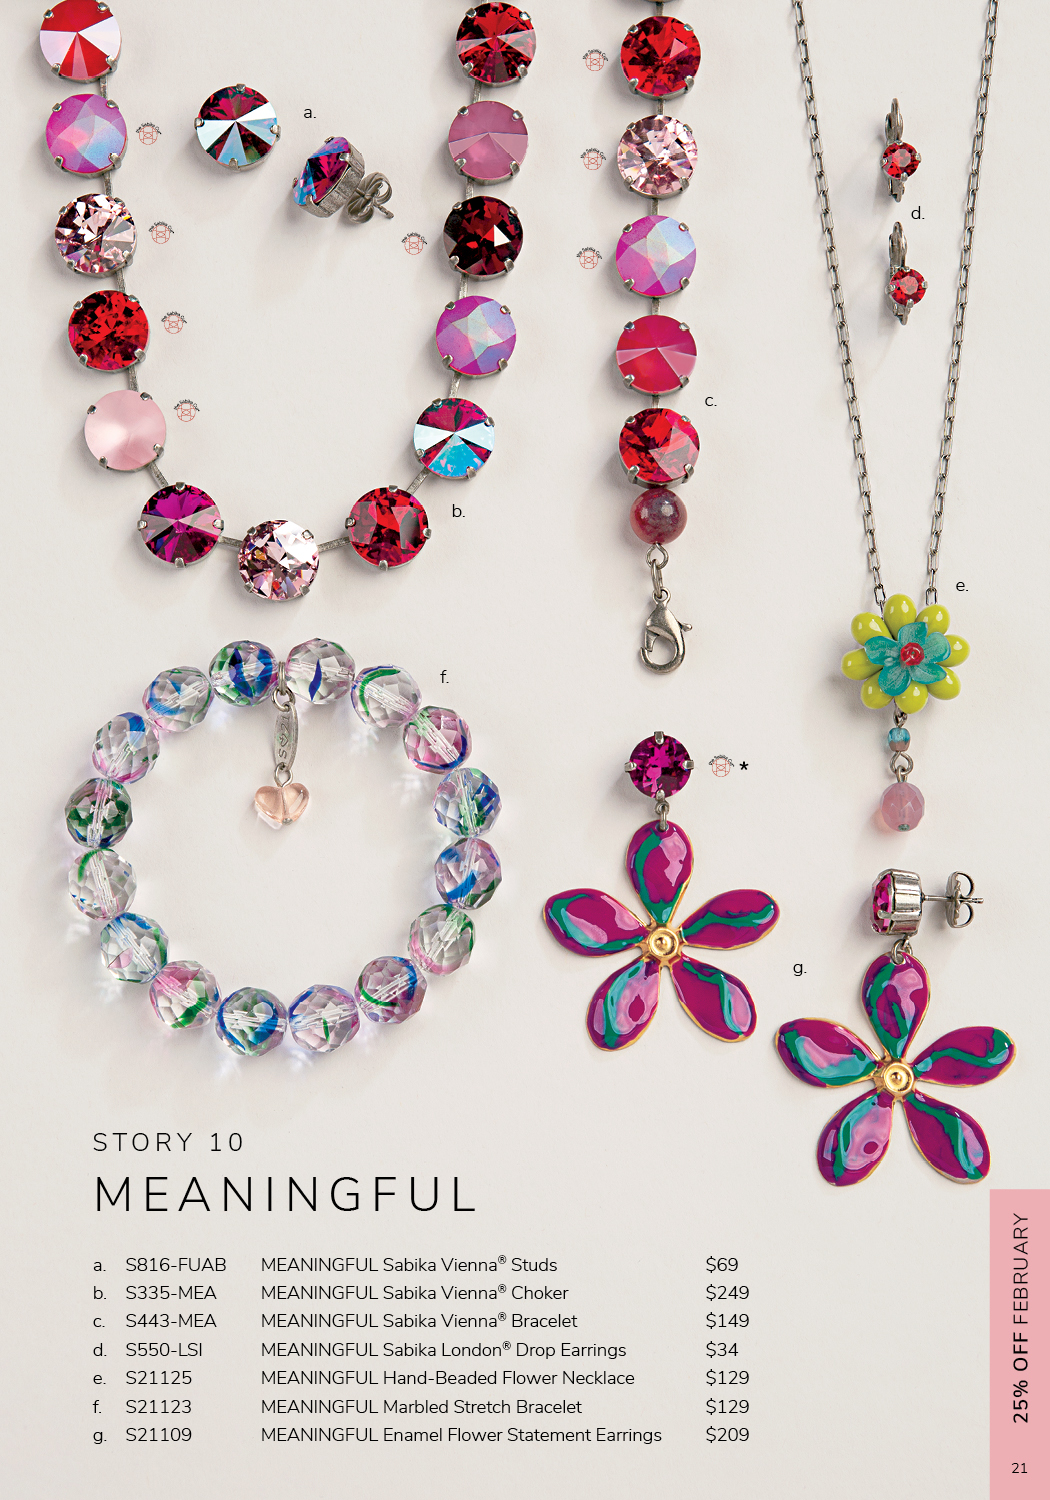 New Collectors item Details about   SABIKA JEWELRY Spring/Summer 2014 Catalog 